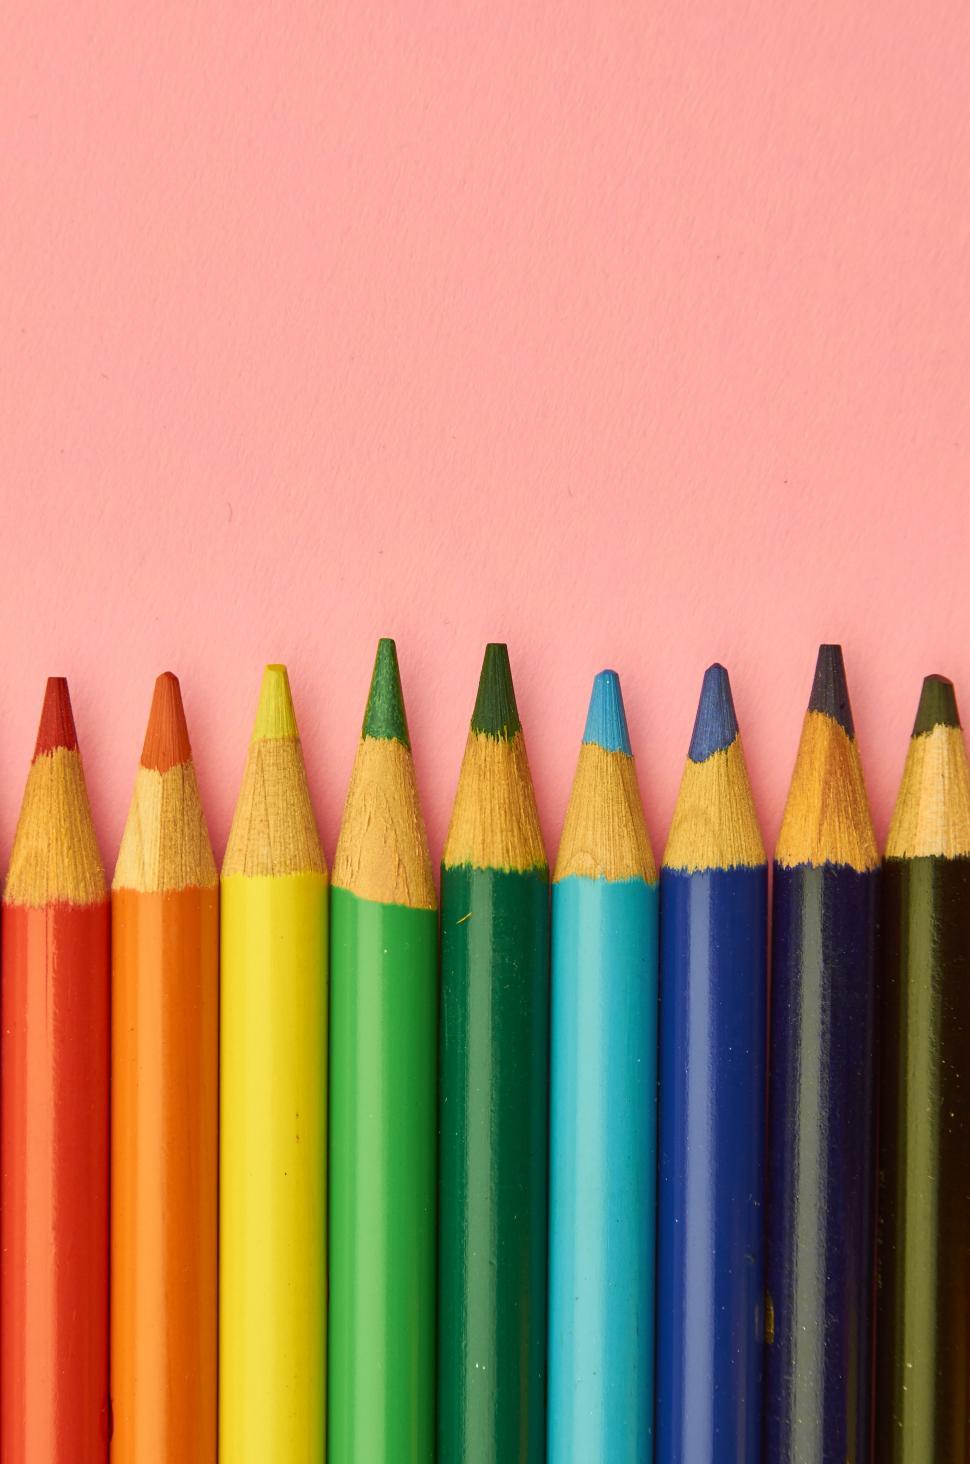 Free Image of A row of colored pencils 